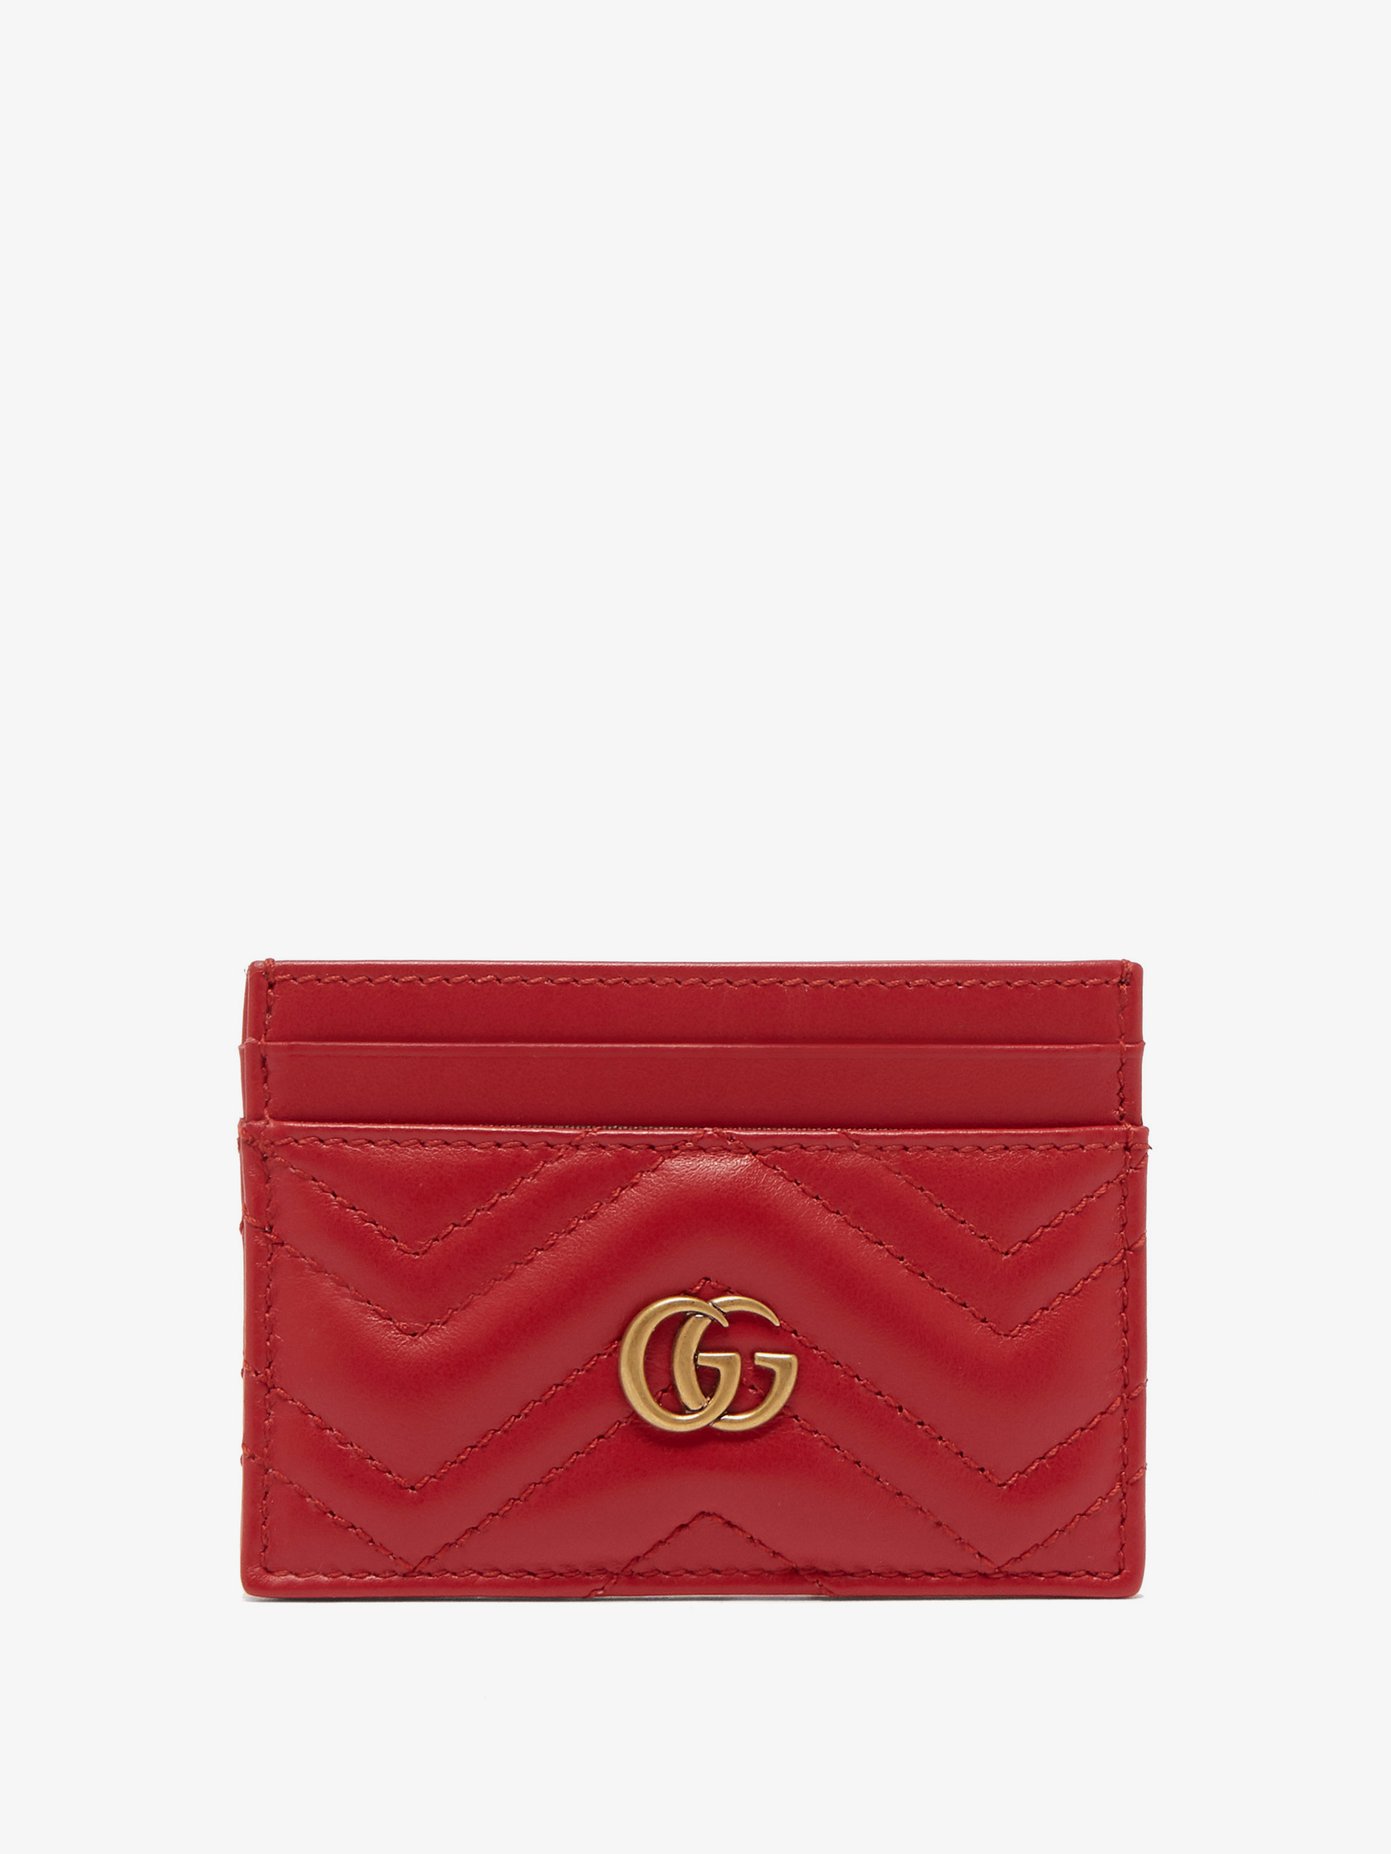 GG Marmont leather cardholder | Gucci 